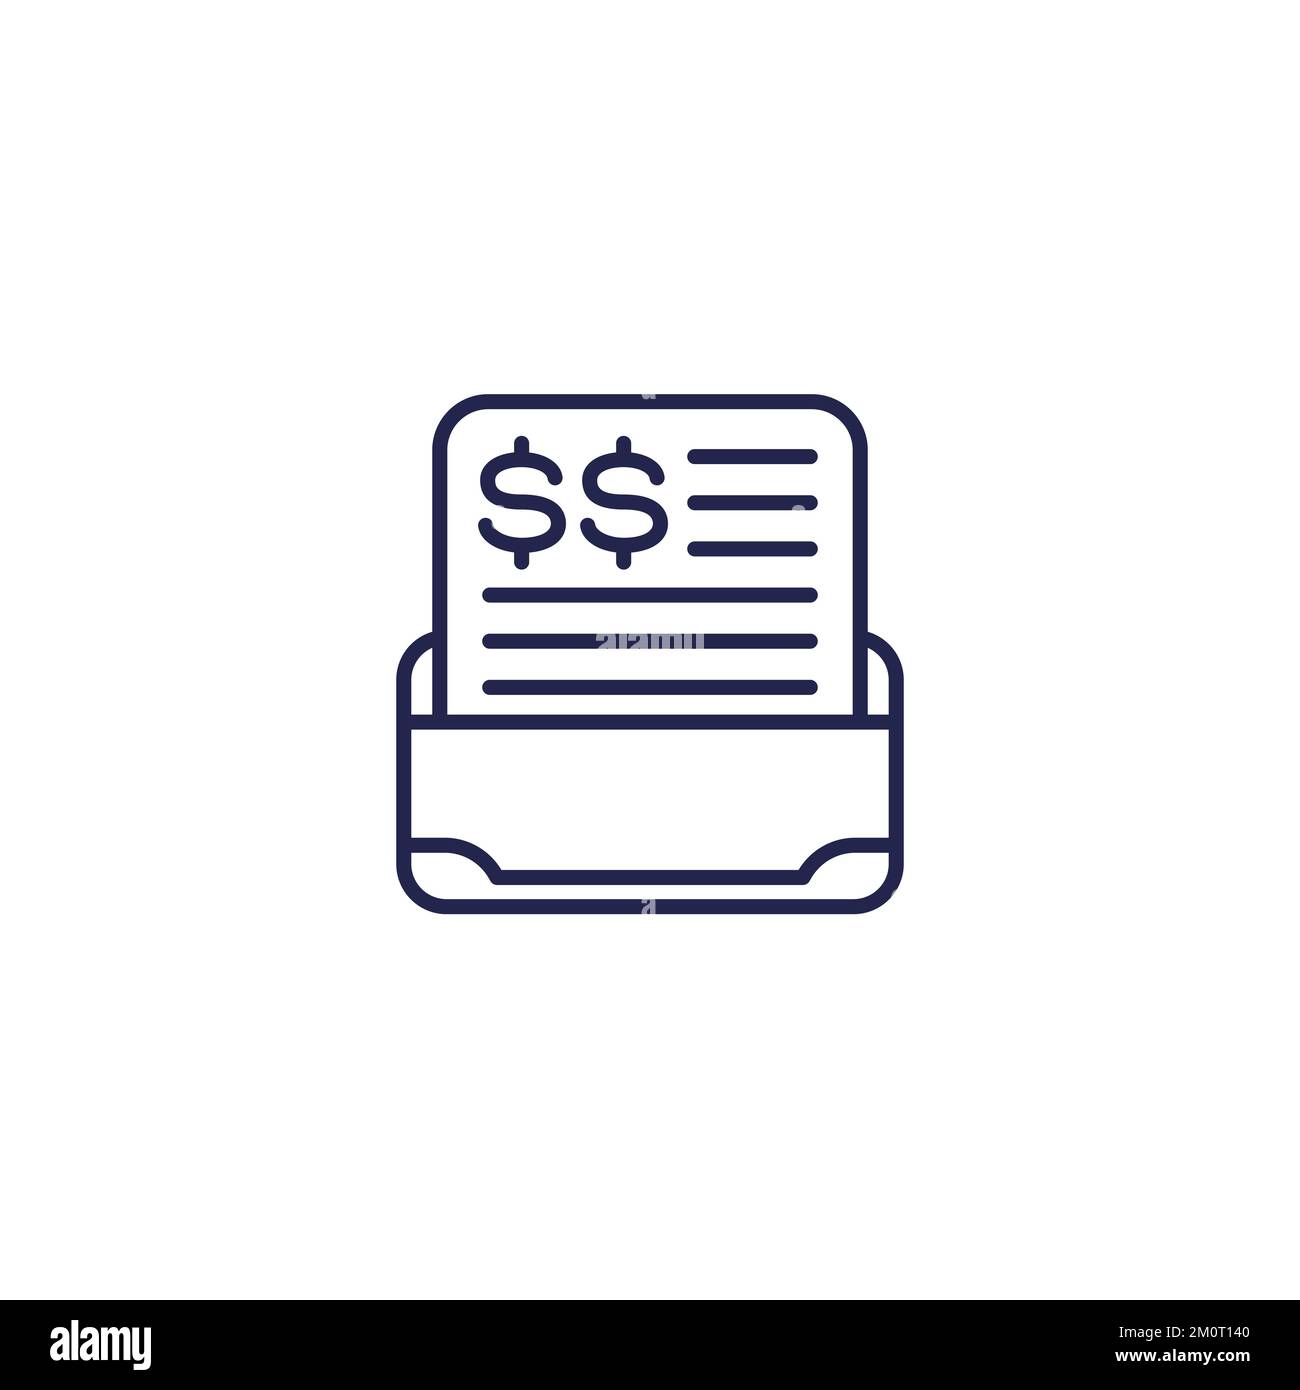 Invoice or paycheck line icon Stock Vector